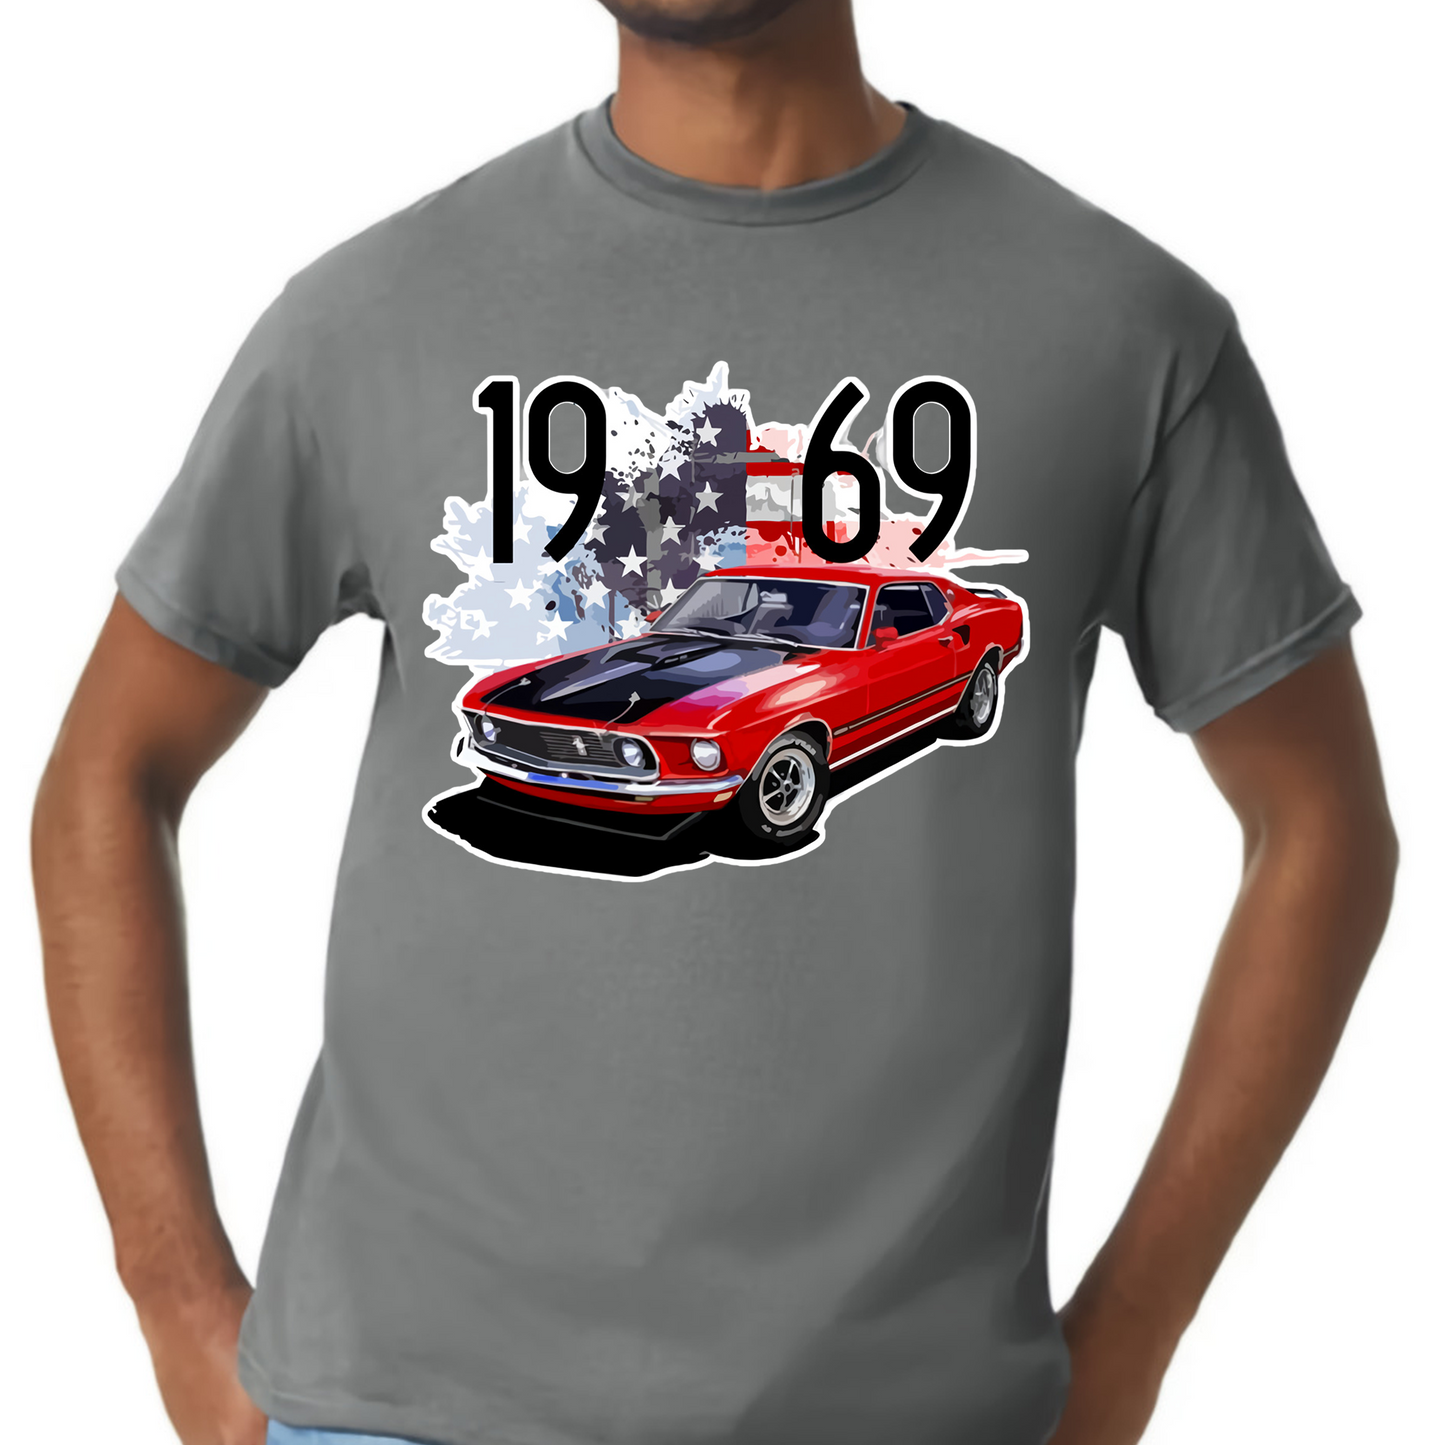 1969 Red Mustang Mach 1 American Classic Car Classic Unisex T-Shirt Gildan 5000 (Made In US) DLHH1504PT02